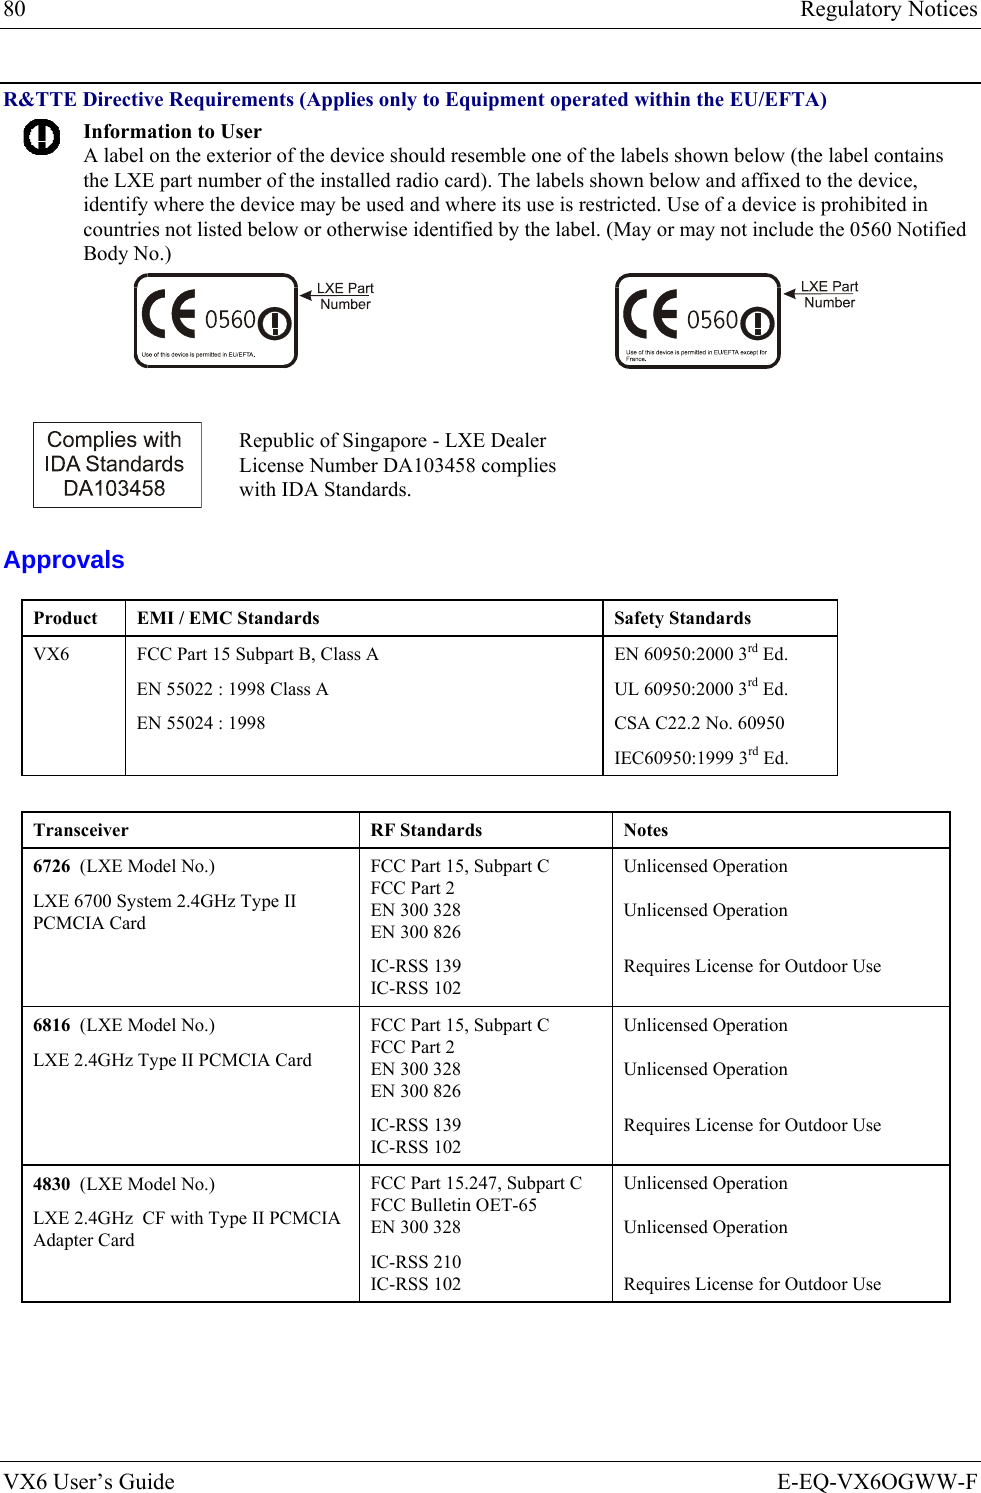 80  Regulatory Notices VX6 User’s Guide  E-EQ-VX6OGWW-F R&amp;TTE Directive Requirements (Applies only to Equipment operated within the EU/EFTA)  Information to User A label on the exterior of the device should resemble one of the labels shown below (the label contains the LXE part number of the installed radio card). The labels shown below and affixed to the device, identify where the device may be used and where its use is restricted. Use of a device is prohibited in countries not listed below or otherwise identified by the label. (May or may not include the 0560 Notified Body No.)     Republic of Singapore - LXE Dealer License Number DA103458 complies with IDA Standards. Approvals Product  EMI / EMC Standards  Safety Standards VX6   FCC Part 15 Subpart B, Class A EN 55022 : 1998 Class A EN 55024 : 1998 EN 60950:2000 3rd Ed. UL 60950:2000 3rd Ed. CSA C22.2 No. 60950 IEC60950:1999 3rd Ed.  Transceiver RF Standards Notes 6726  (LXE Model No.) LXE 6700 System 2.4GHz Type II PCMCIA Card FCC Part 15, Subpart C FCC Part 2 EN 300 328 EN 300 826 IC-RSS 139 IC-RSS 102 Unlicensed Operation  Unlicensed Operation  Requires License for Outdoor Use 6816  (LXE Model No.) LXE 2.4GHz Type II PCMCIA Card FCC Part 15, Subpart C FCC Part 2 EN 300 328 EN 300 826 IC-RSS 139 IC-RSS 102 Unlicensed Operation  Unlicensed Operation  Requires License for Outdoor Use 4830  (LXE Model No.) LXE 2.4GHz  CF with Type II PCMCIA Adapter Card FCC Part 15.247, Subpart C FCC Bulletin OET-65 EN 300 328 IC-RSS 210 IC-RSS 102 Unlicensed Operation  Unlicensed Operation  Requires License for Outdoor Use    